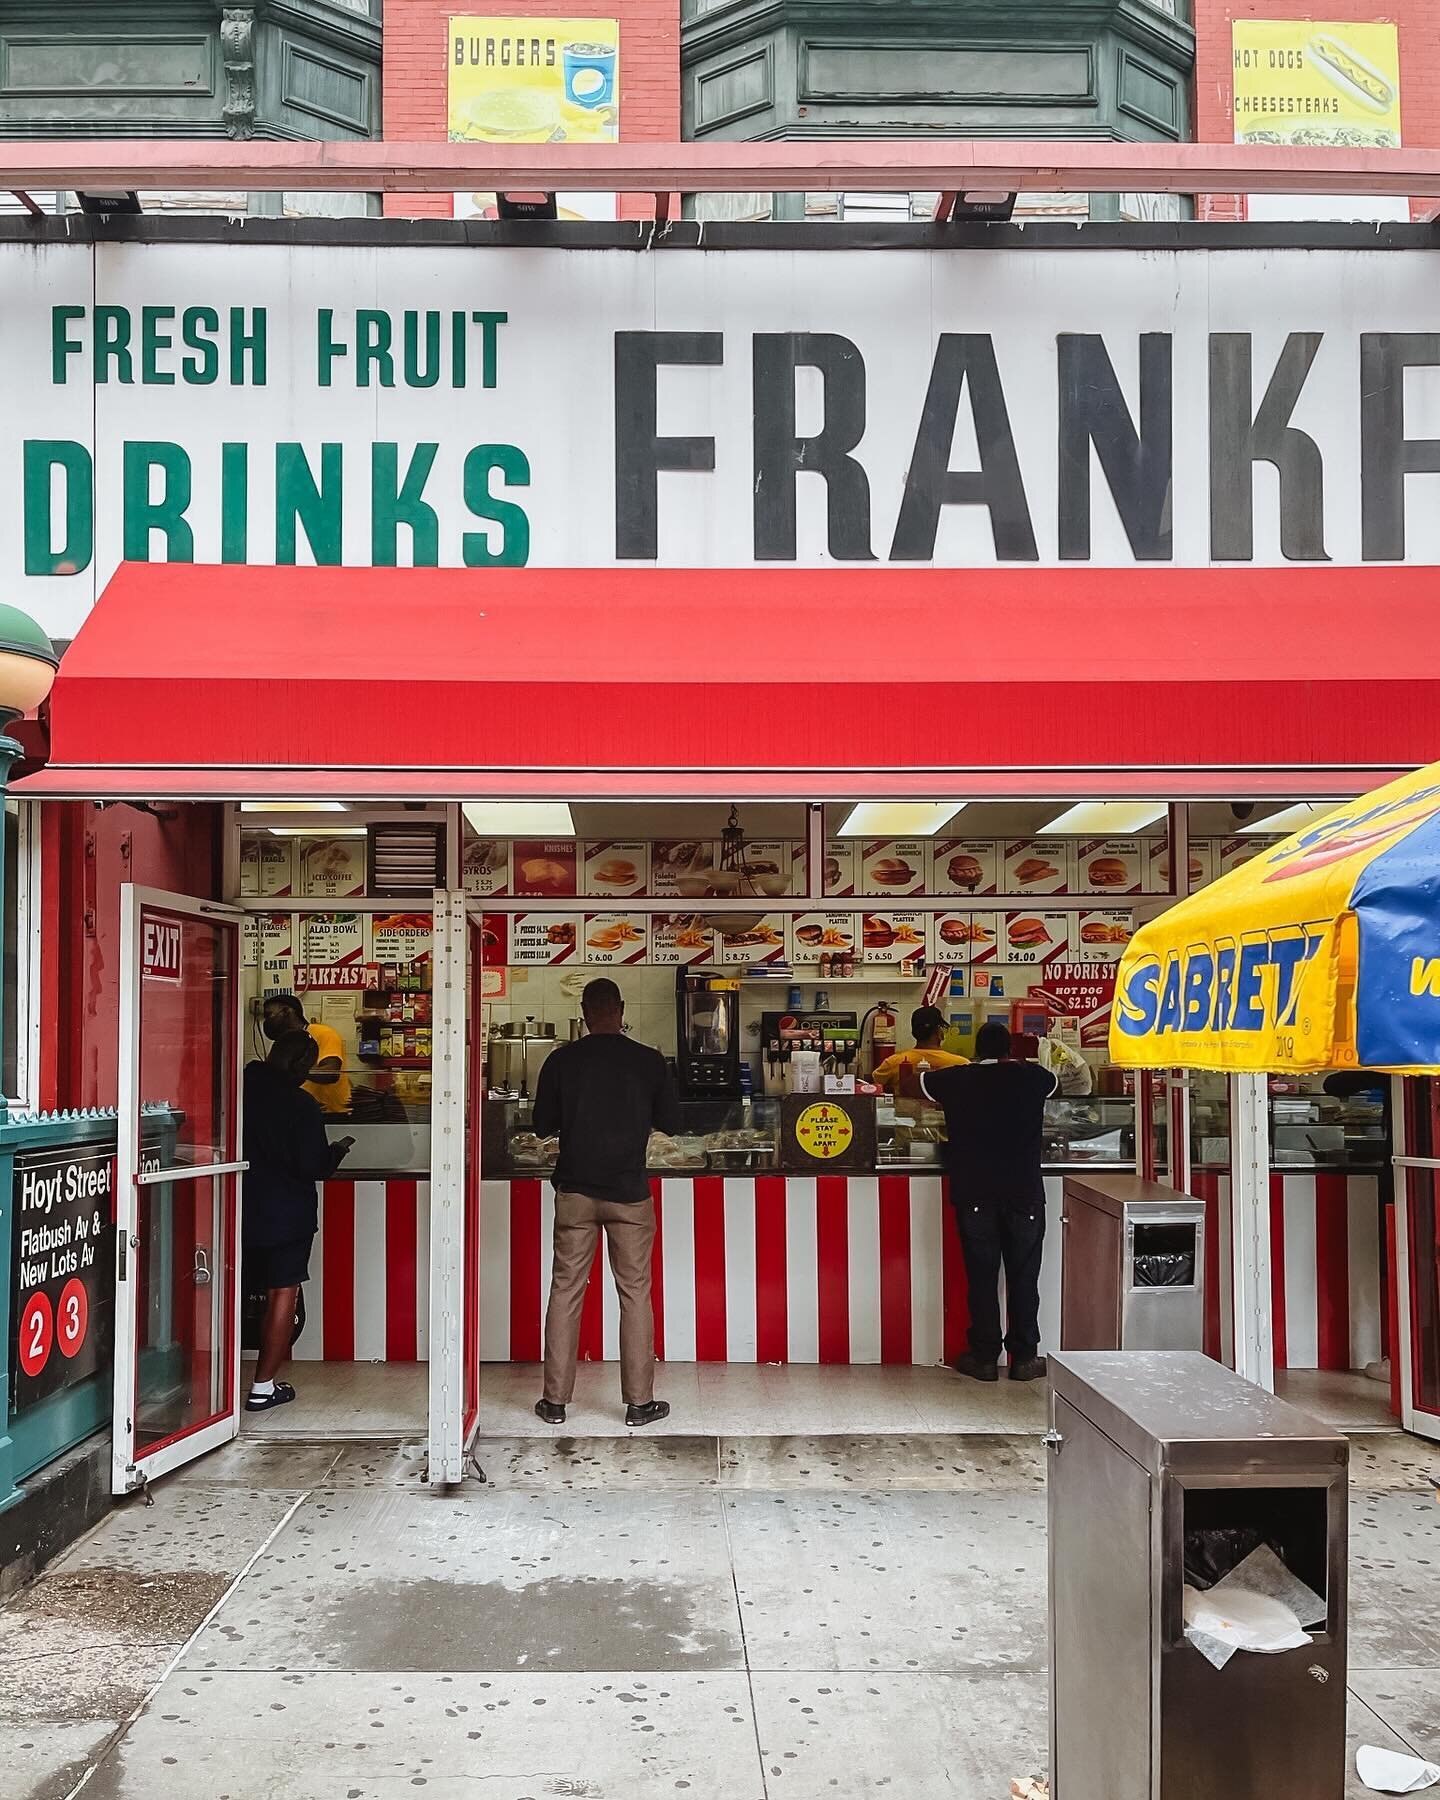 Is Fulton Hot Dog King done for? Not exactly. Make sure to follow @fultonhotdogkingnyc for updates on this downtown Brooklyn icon.
⠀⠀⠀⠀⠀⠀⠀⠀⠀
&ldquo;We tried negotiating the lease but [the landlord] asked for more rent and we just couldn&rsquo;t do it